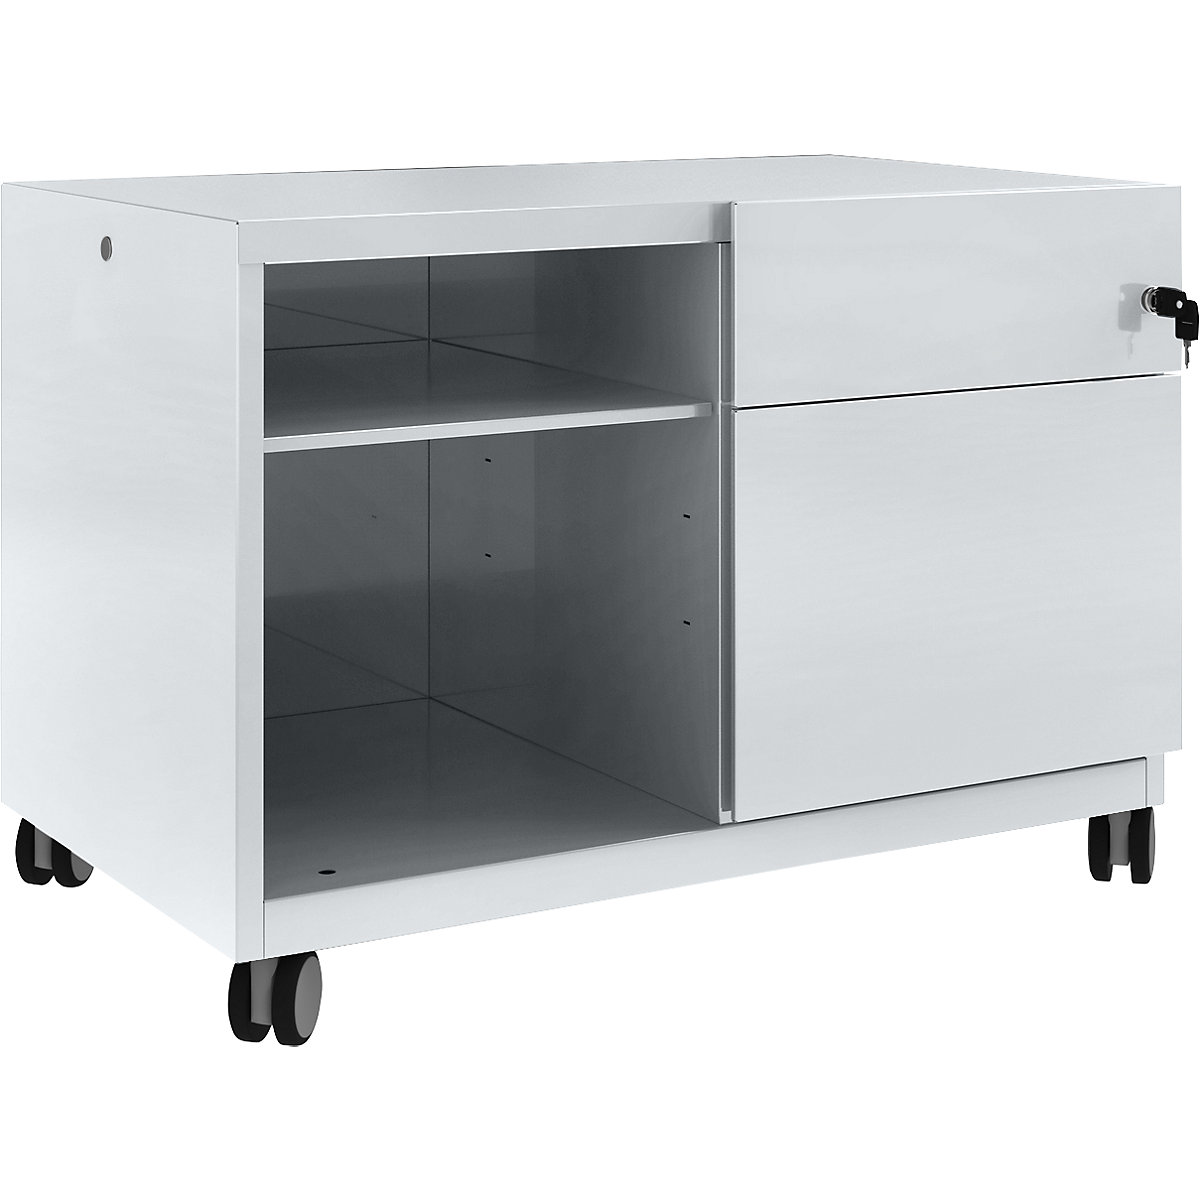 Note™ CADDY, HxBxT 563 x 800 x 490 mm – BISLEY, 1 universal drawer and suspension file drawer on the right, alaska-11